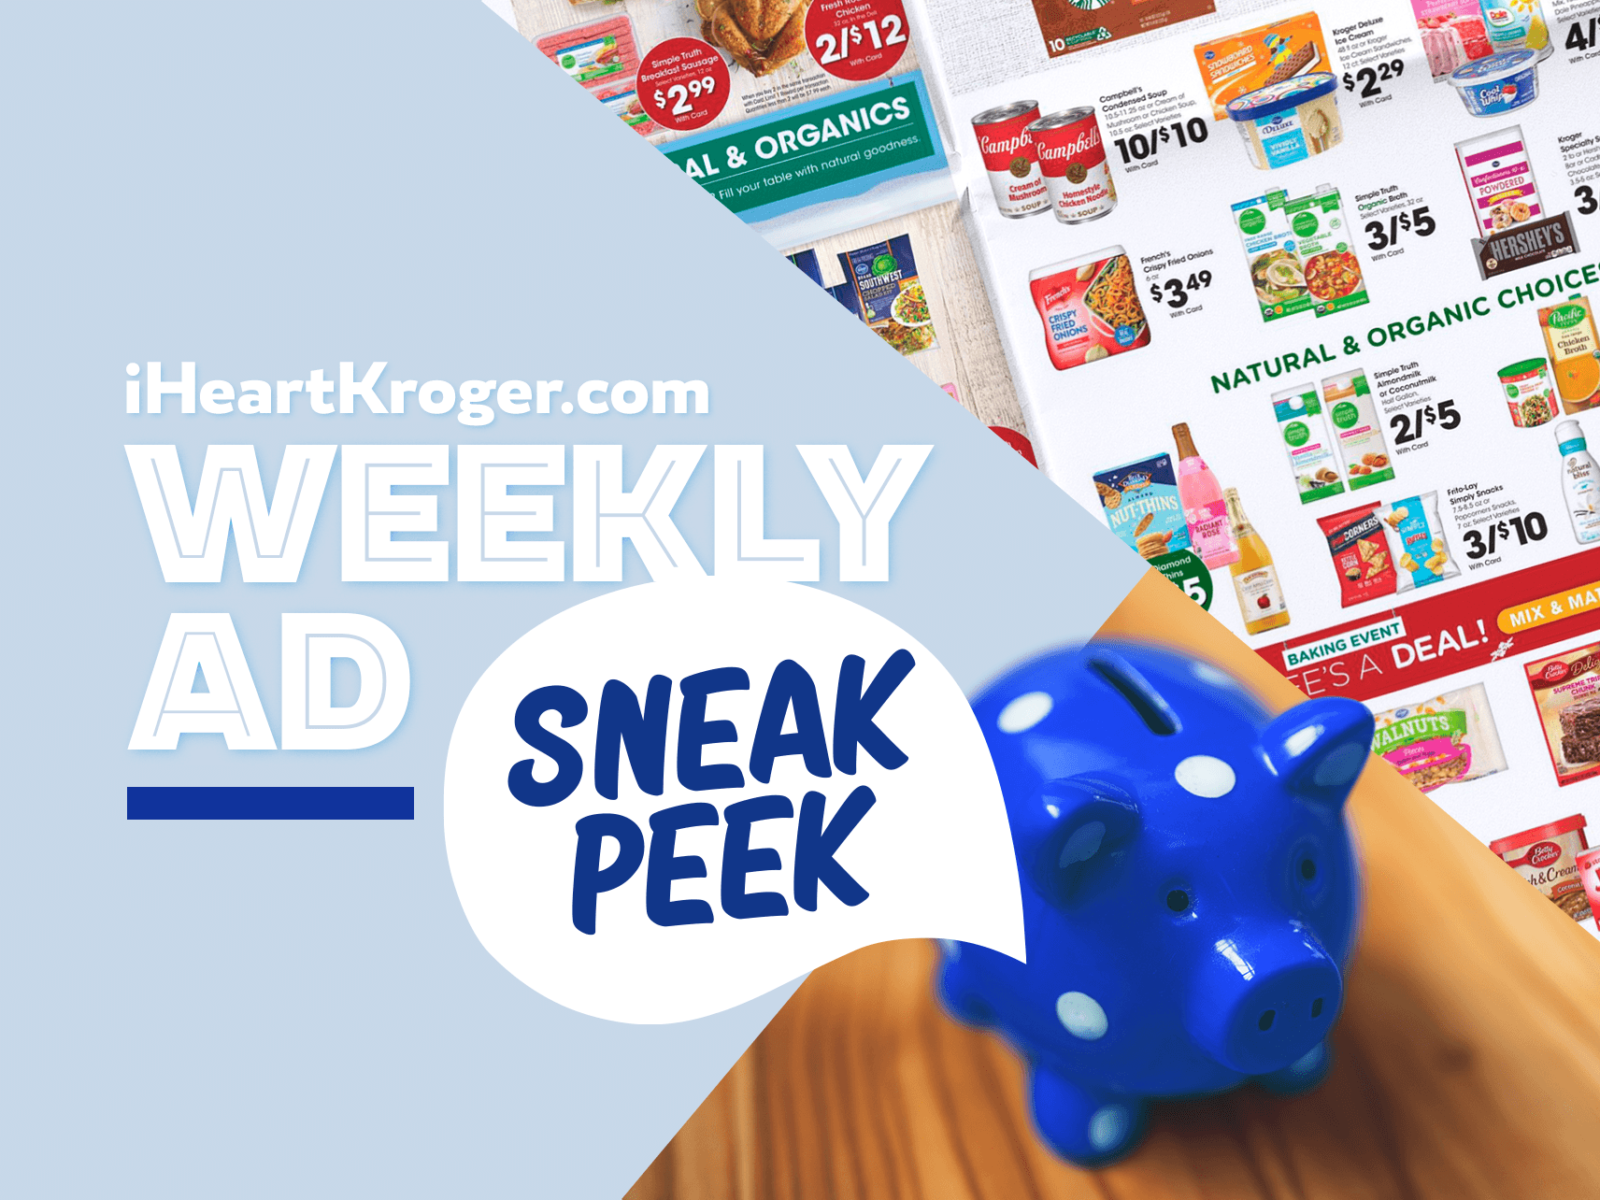 Kroger Ad & Coupons Week Of 11/16 to 11/24